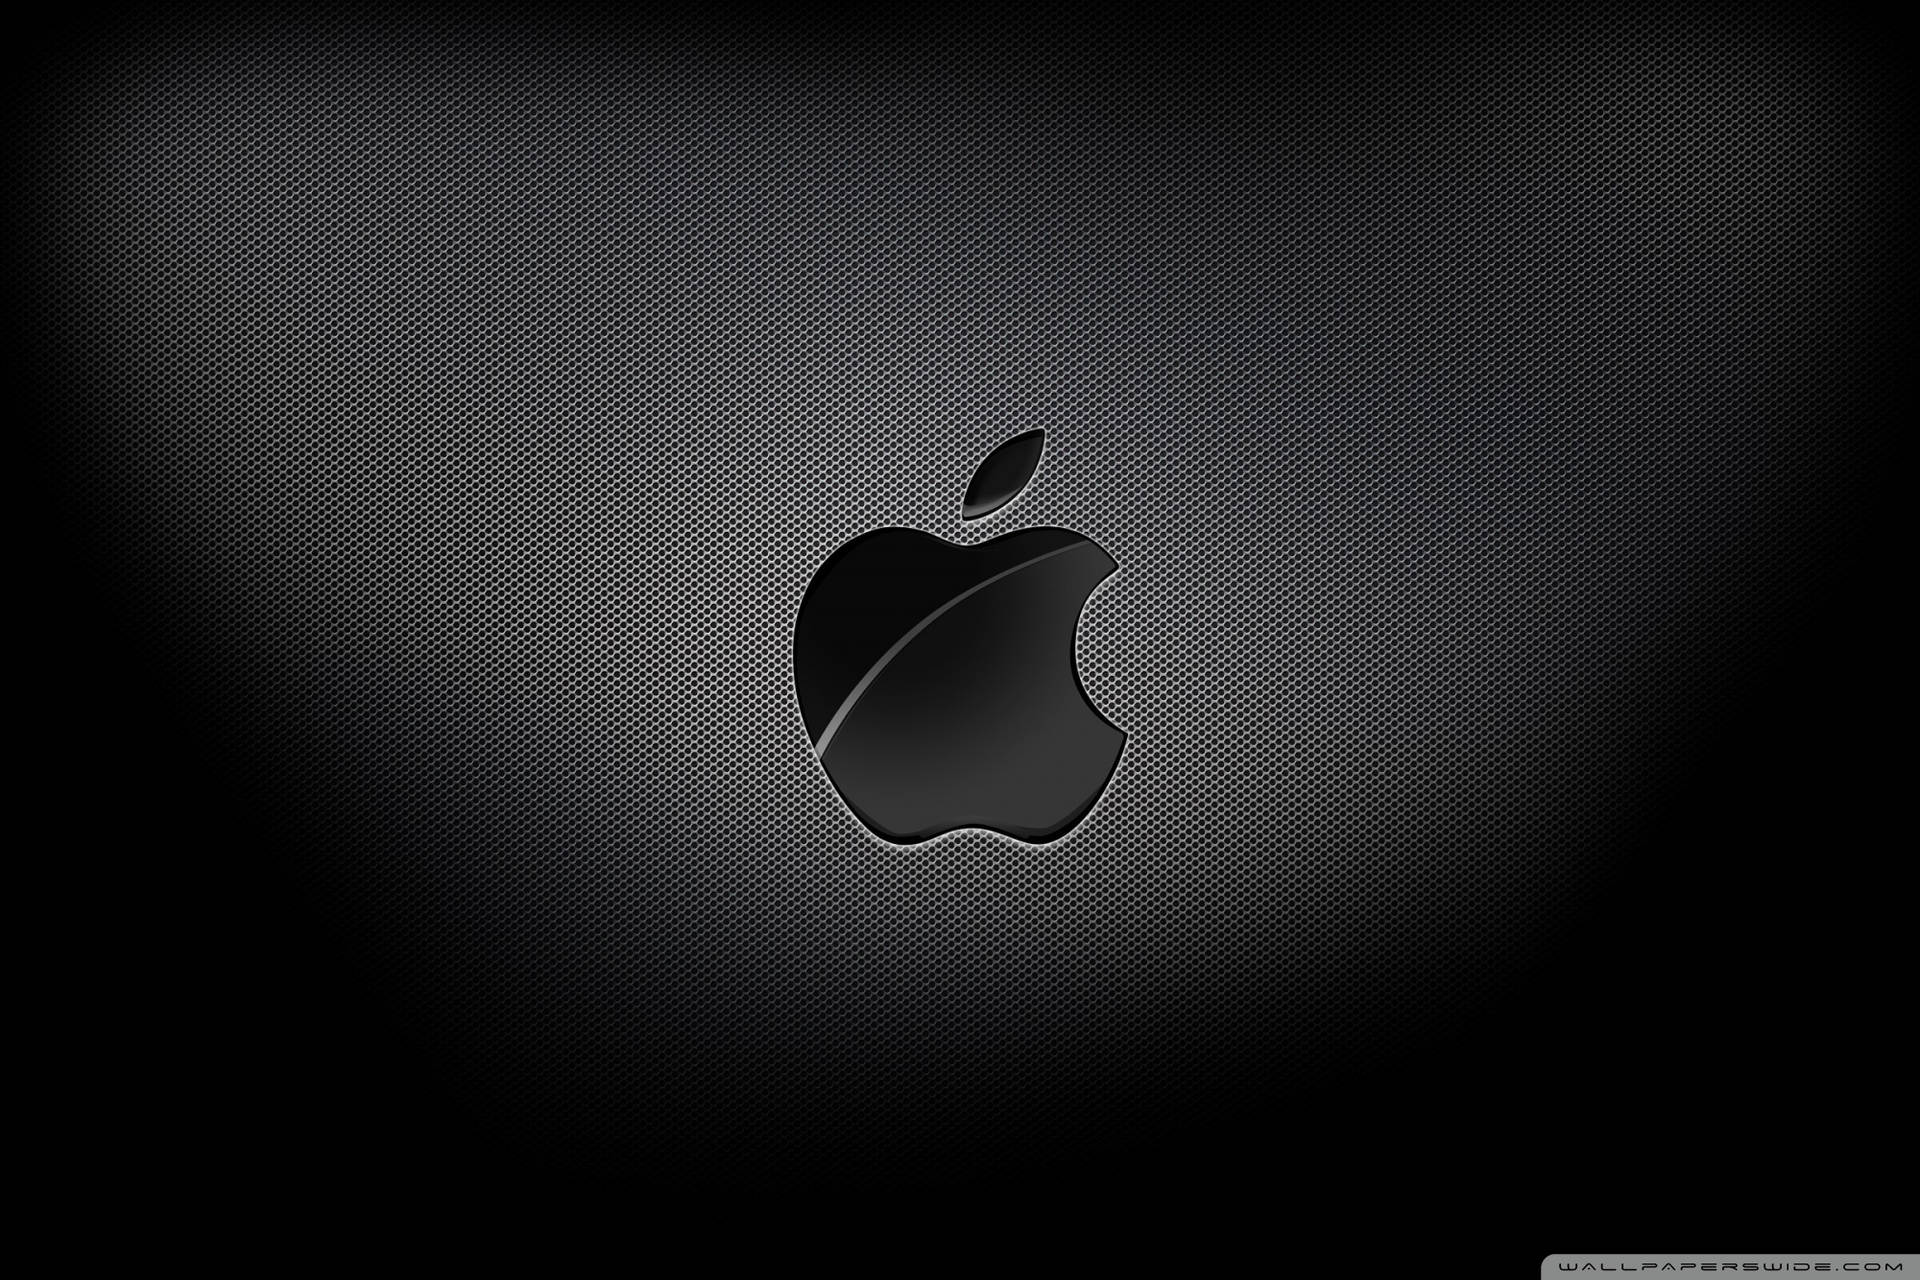 Intriguing Display Of Apple Logo In 4k Resolution On A Black Carbon Texture. Background